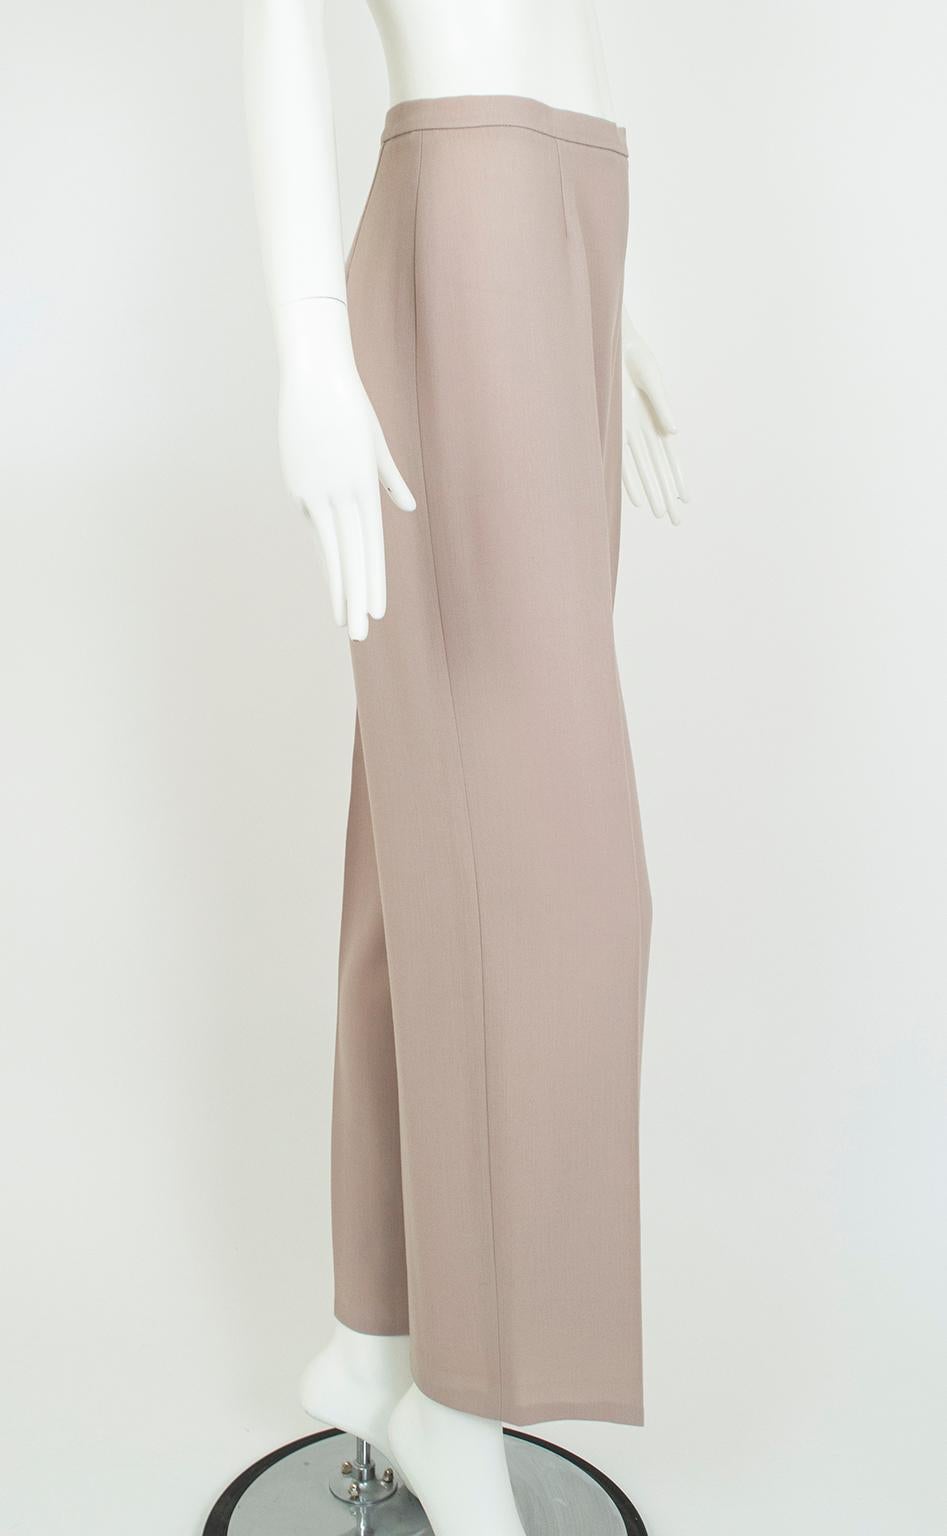 Max Mara Taupe Wool and Silk Crêpe Belted Pant Suit - It 40 – 42, 1990s For Sale 8